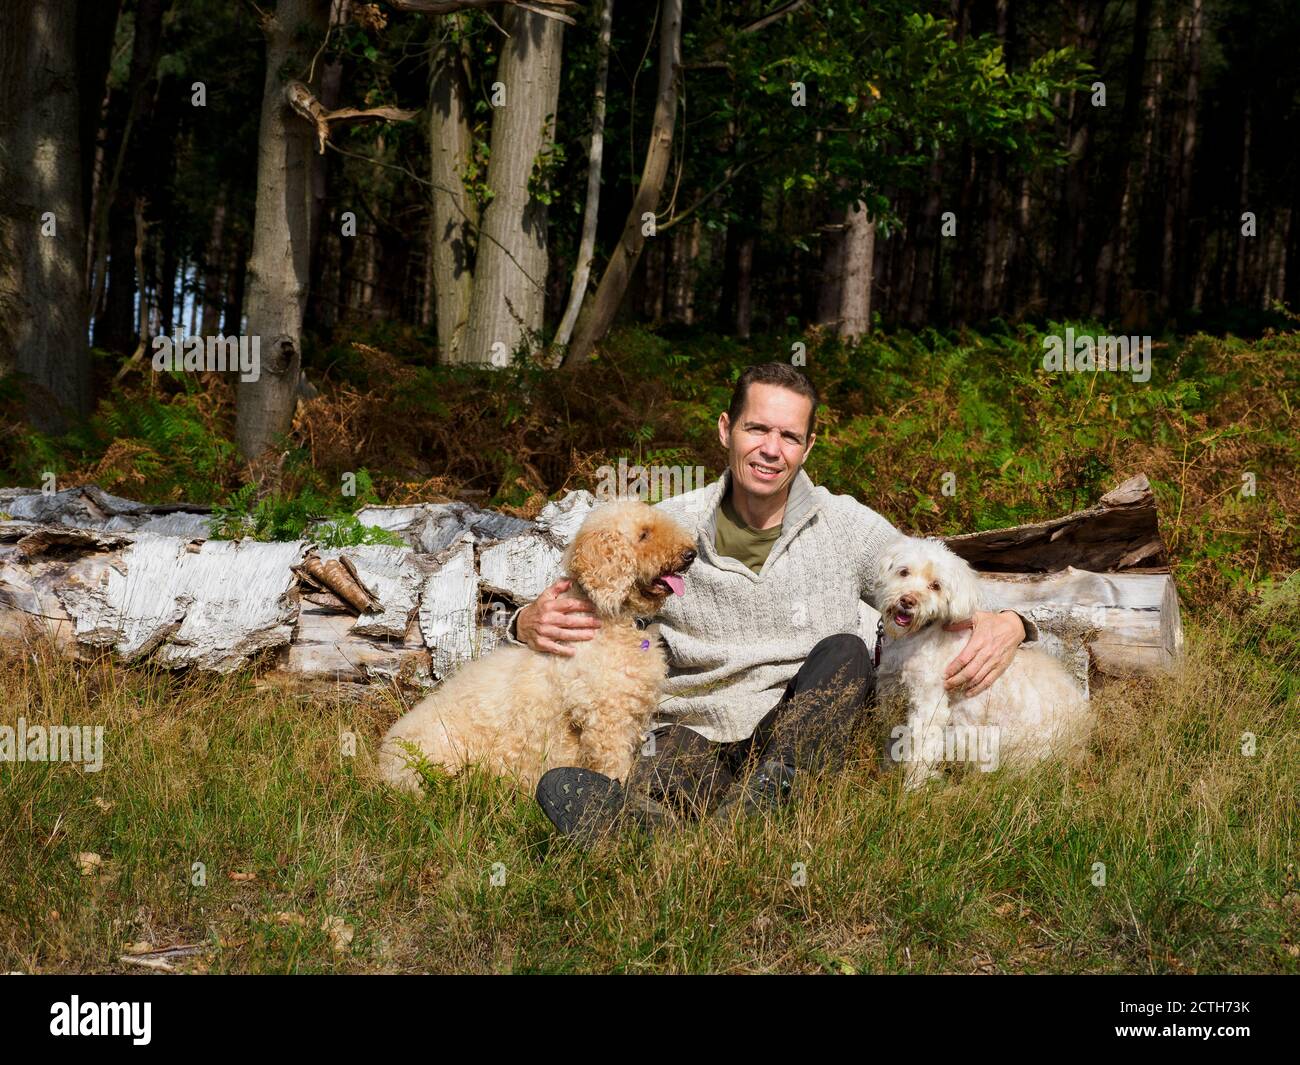 Man sat with dogs in forest, Thetford Forest, Norfolk, UK Stock Photo